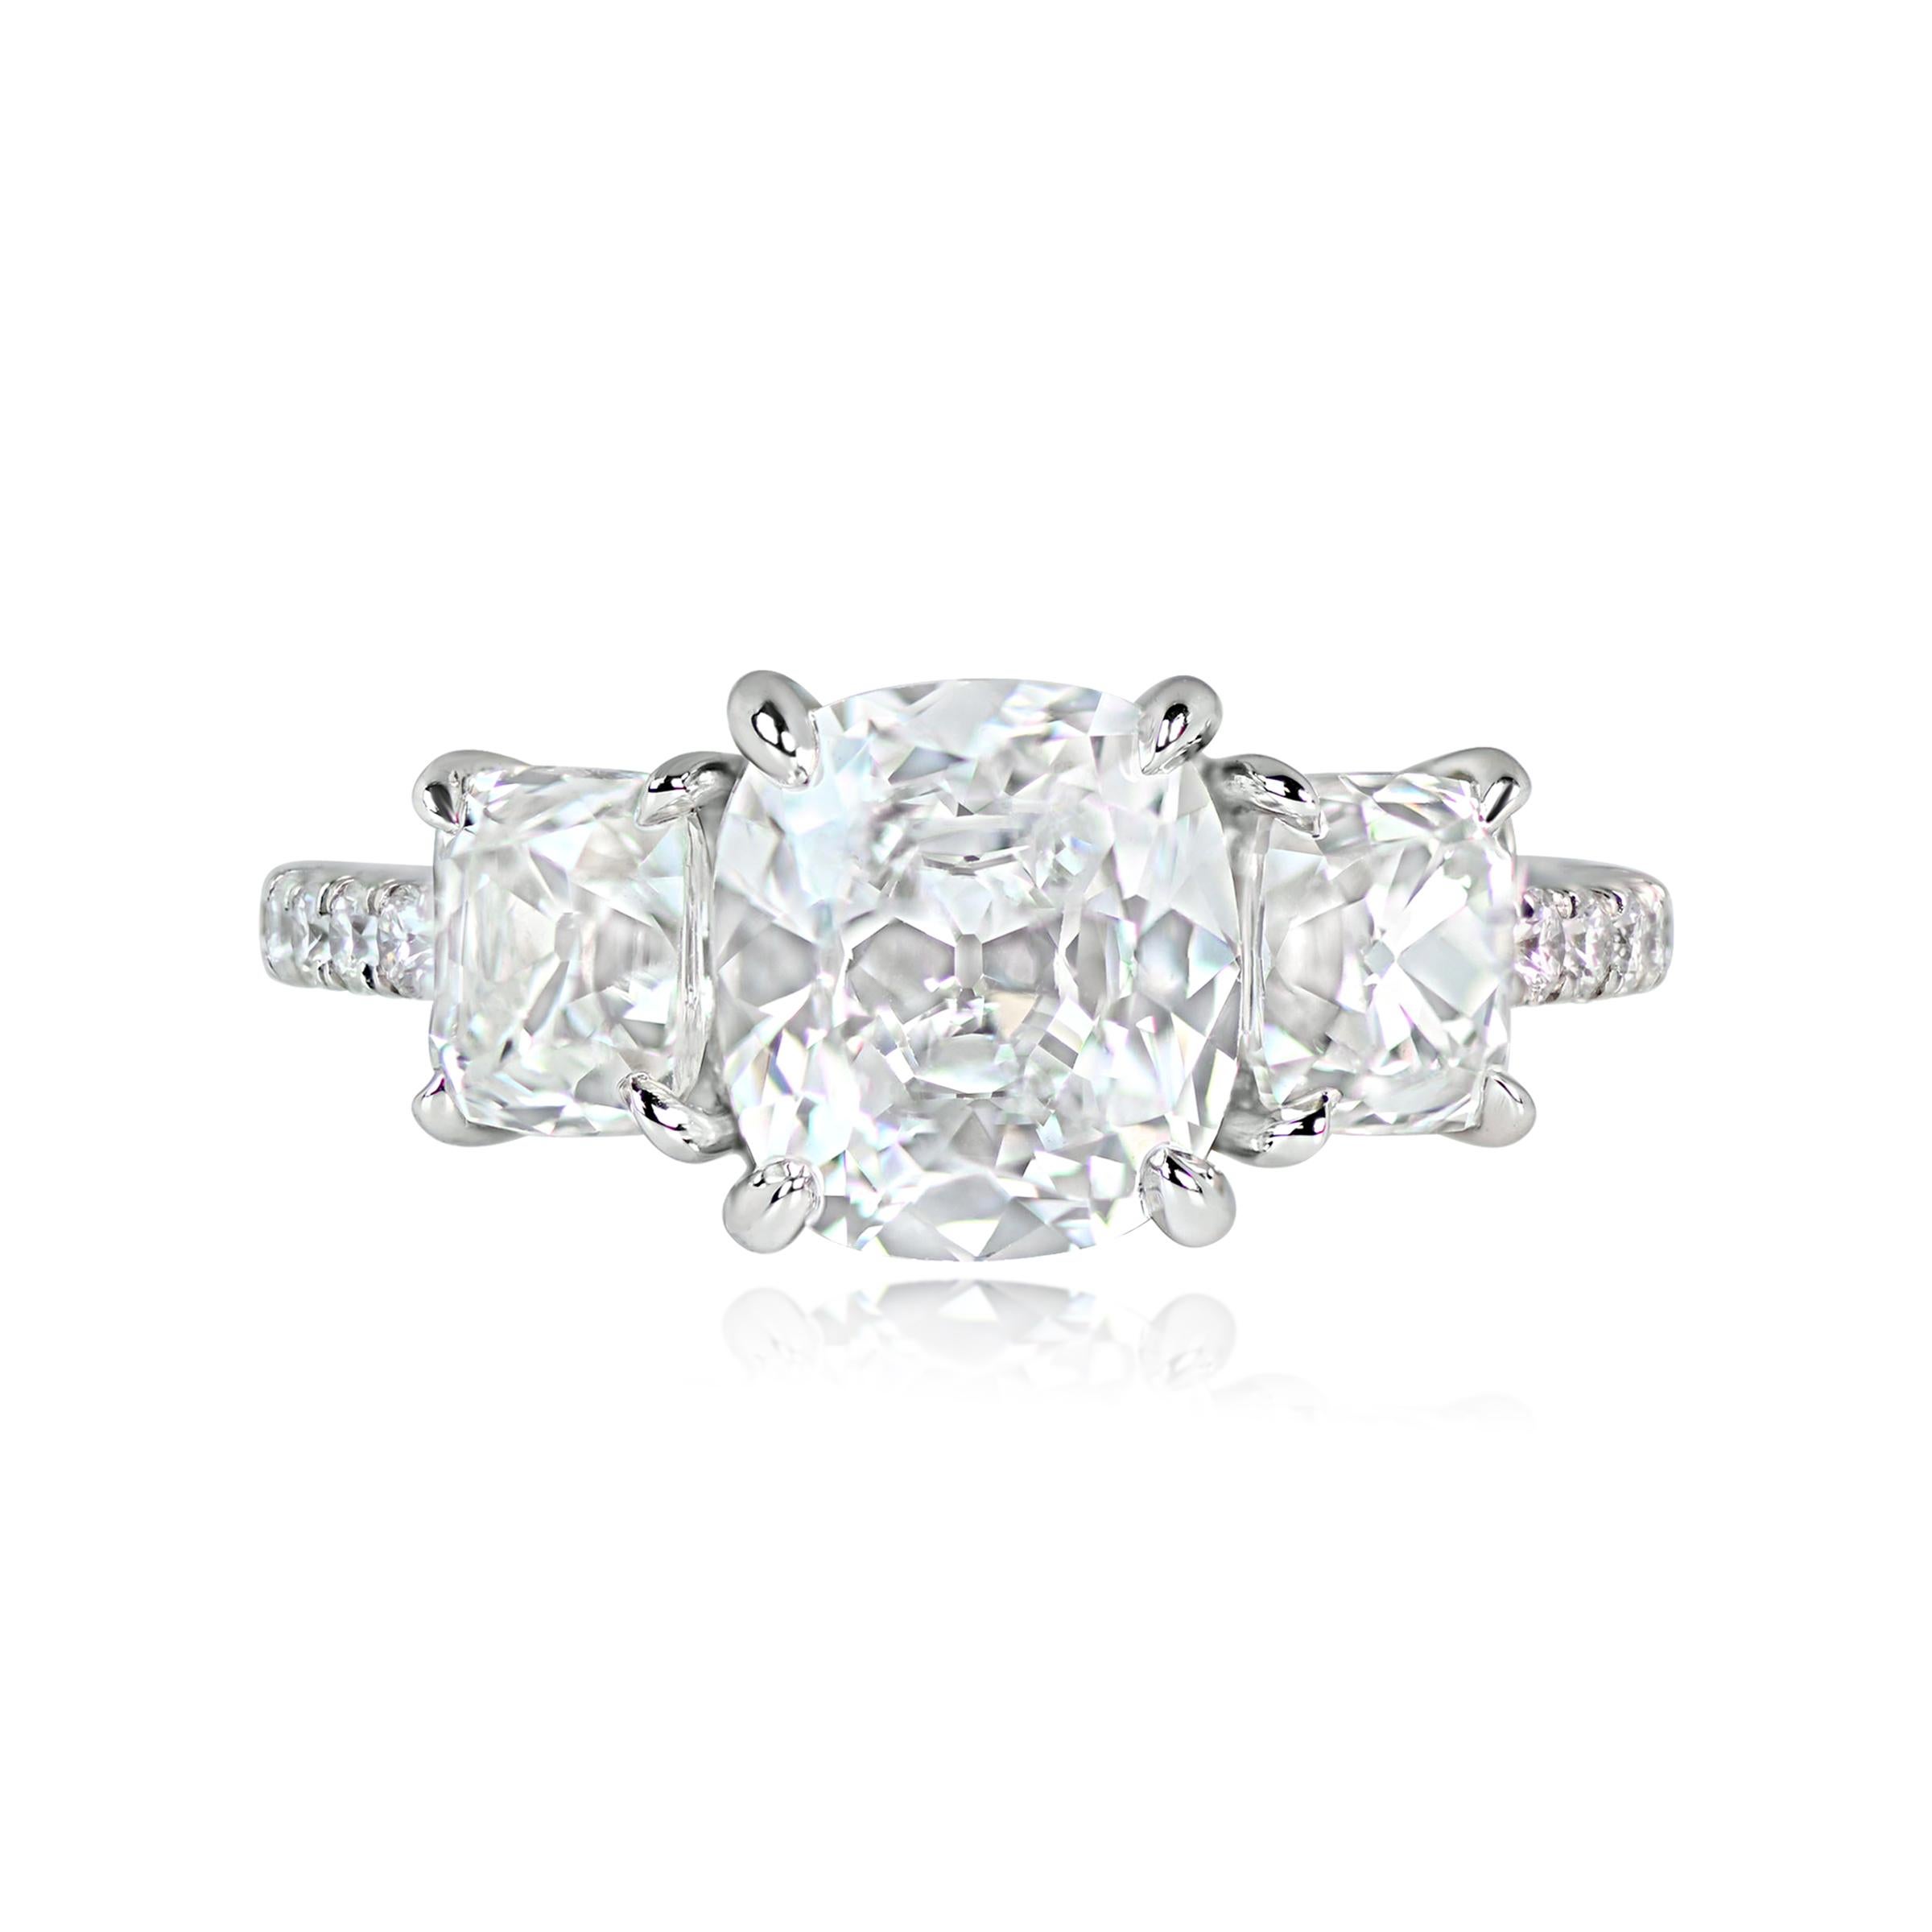 This is a stunning platinum and diamond three-stone ring with an antique cushion cut diamond at the center, weighing 2.01 carats and certified by the GIA as D color and VVS2 clarity. The two smaller antique cushion cut diamonds flanking the center